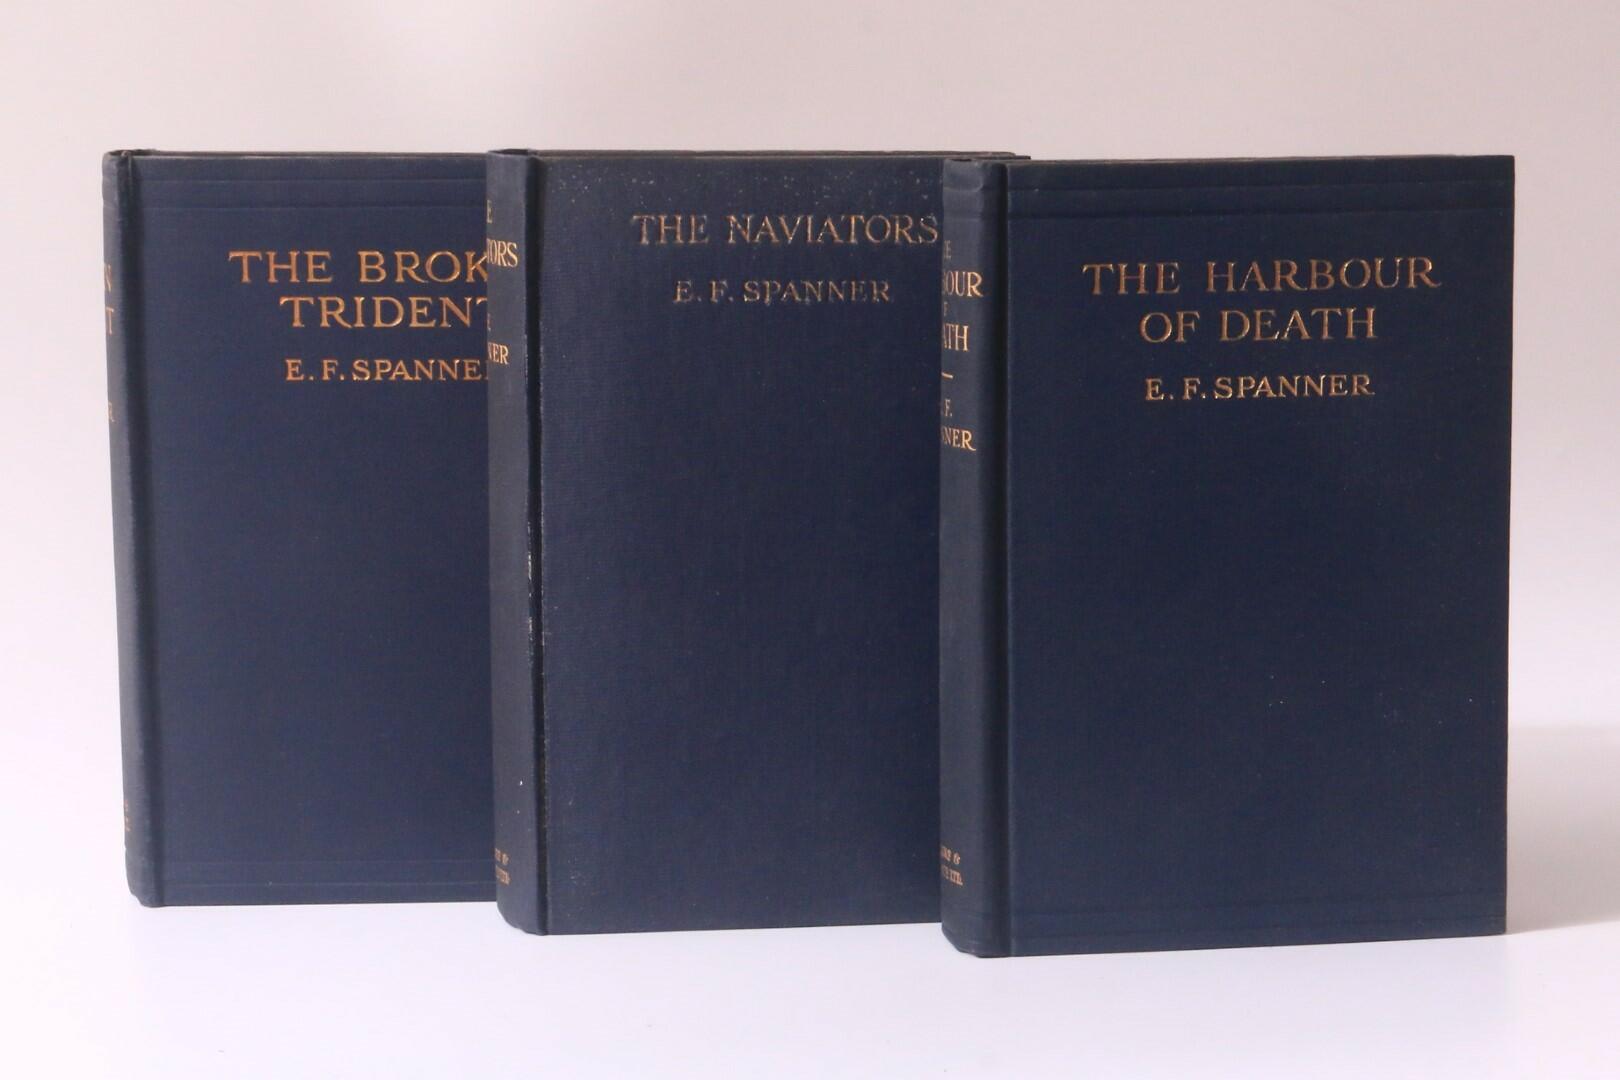 E.F. Spanner - The Broken Trident, The Navigators w/ The Harbour of Death - Williams & Norgate, 1926-1927, Signed First Edition.